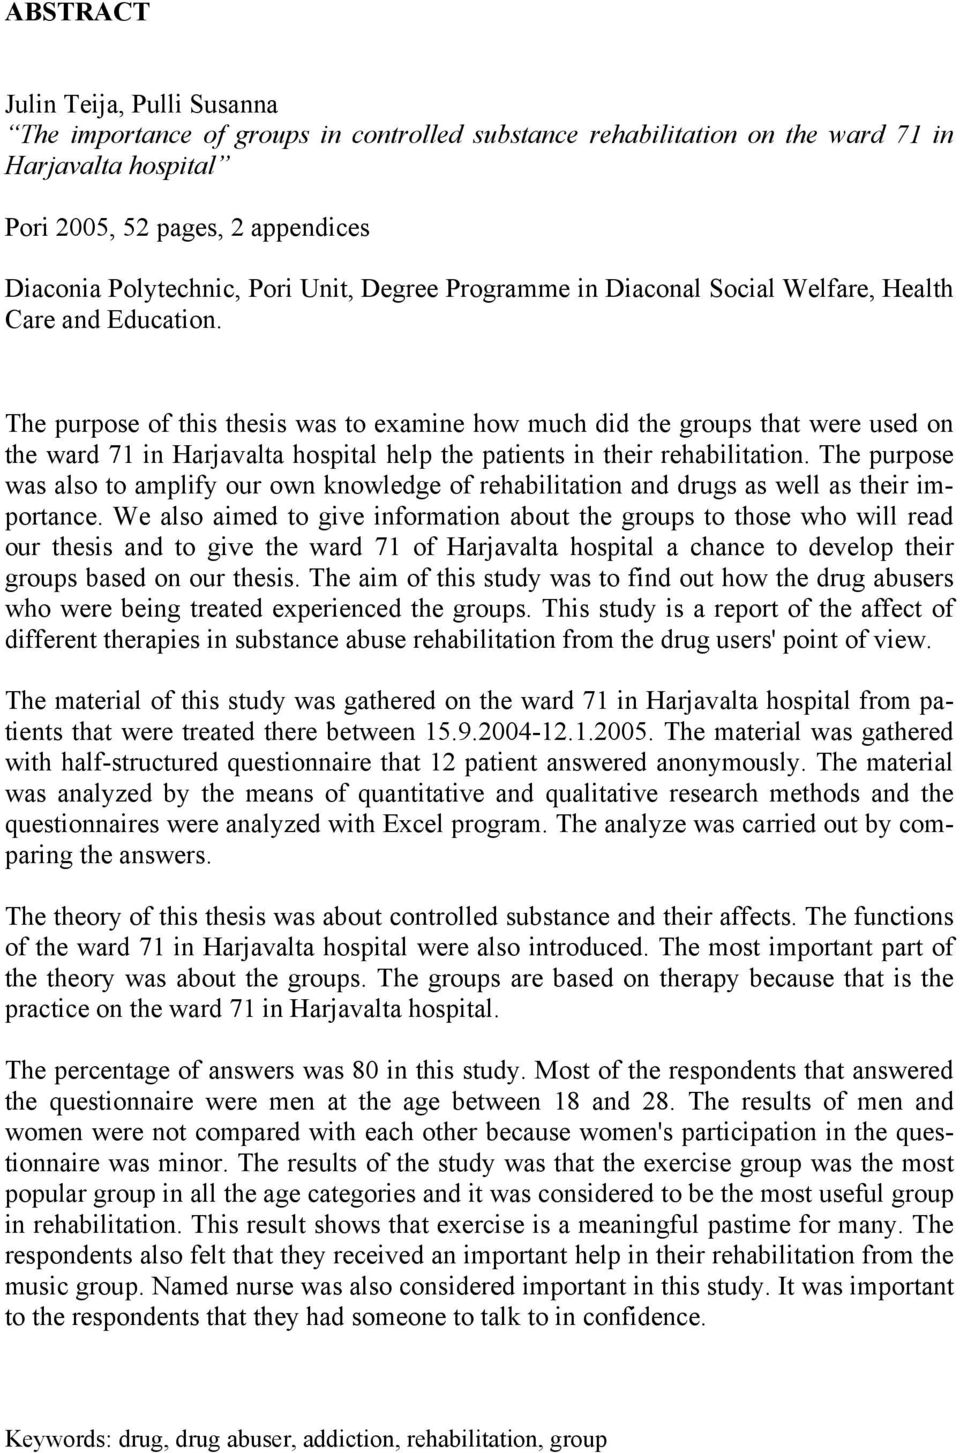 The purpose of this thesis was to examine how much did the groups that were used on the ward 71 in Harjavalta hospital help the patients in their rehabilitation.